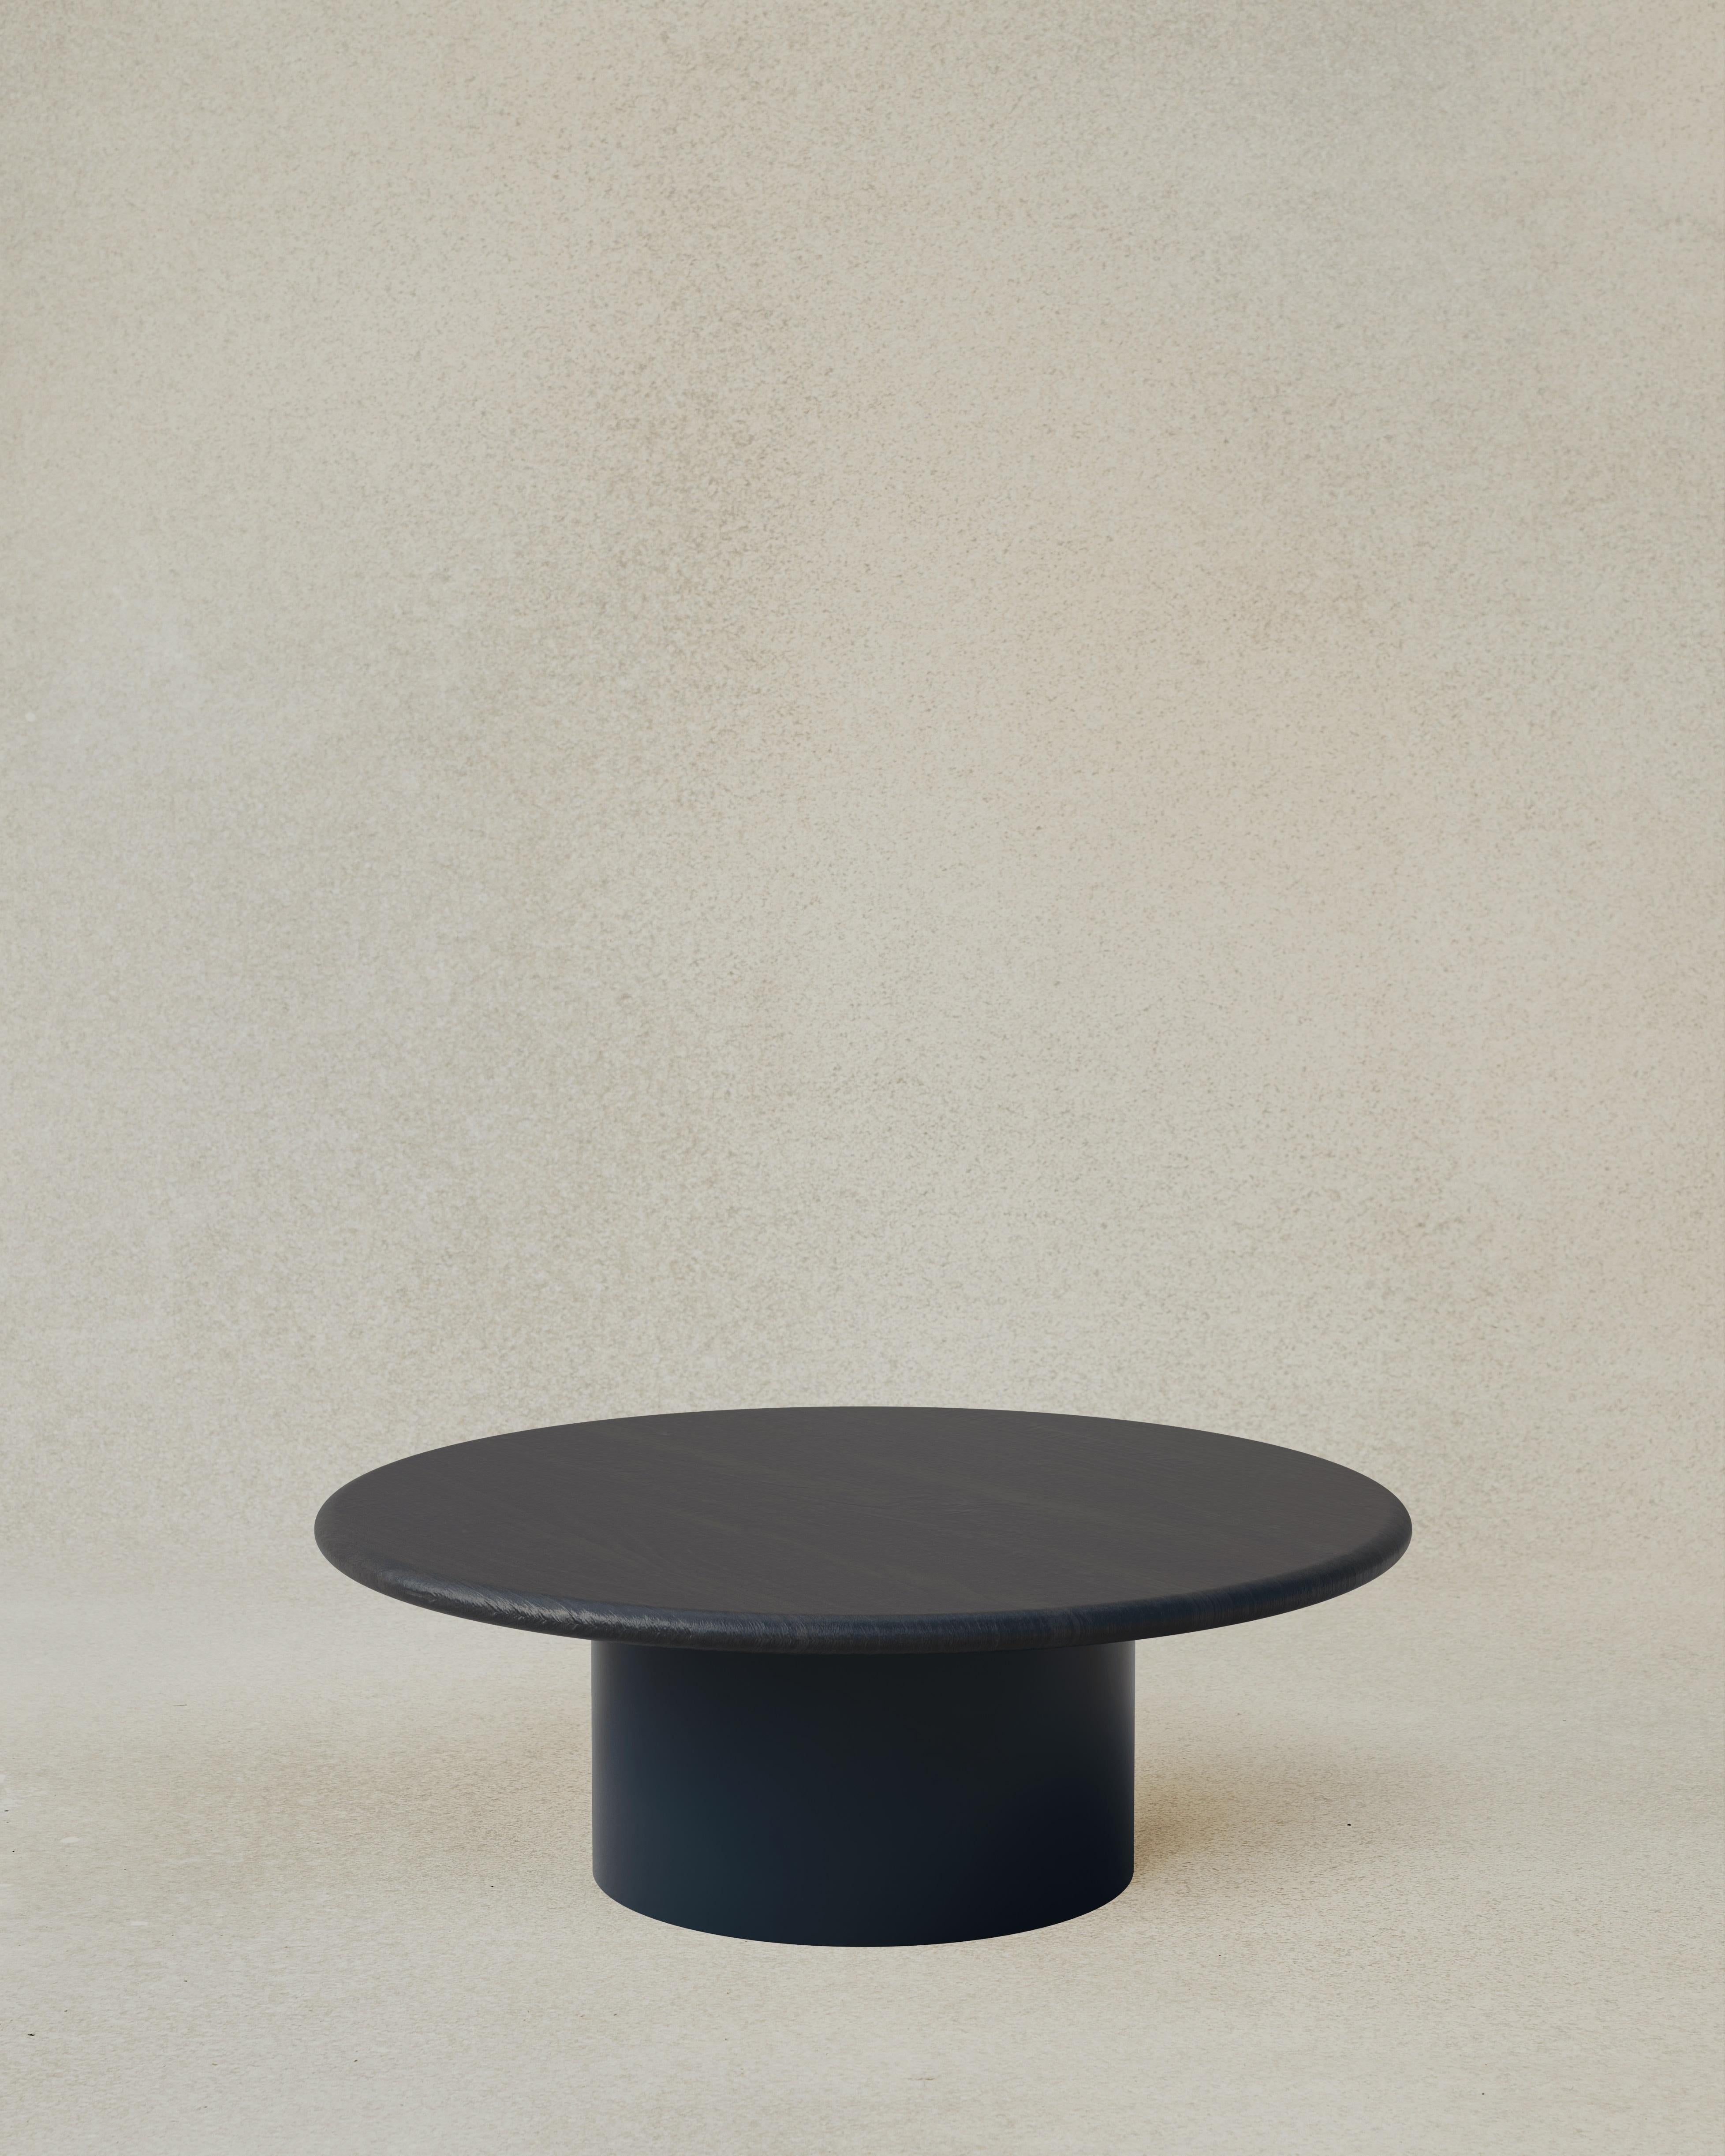 The Raindrop 800 is the second to largest coffee table, perfect for a mid sized space in your home paired with a side table, and now available in a range of finishes to suit any interior or style. The raindrops nestle together to form a cascading